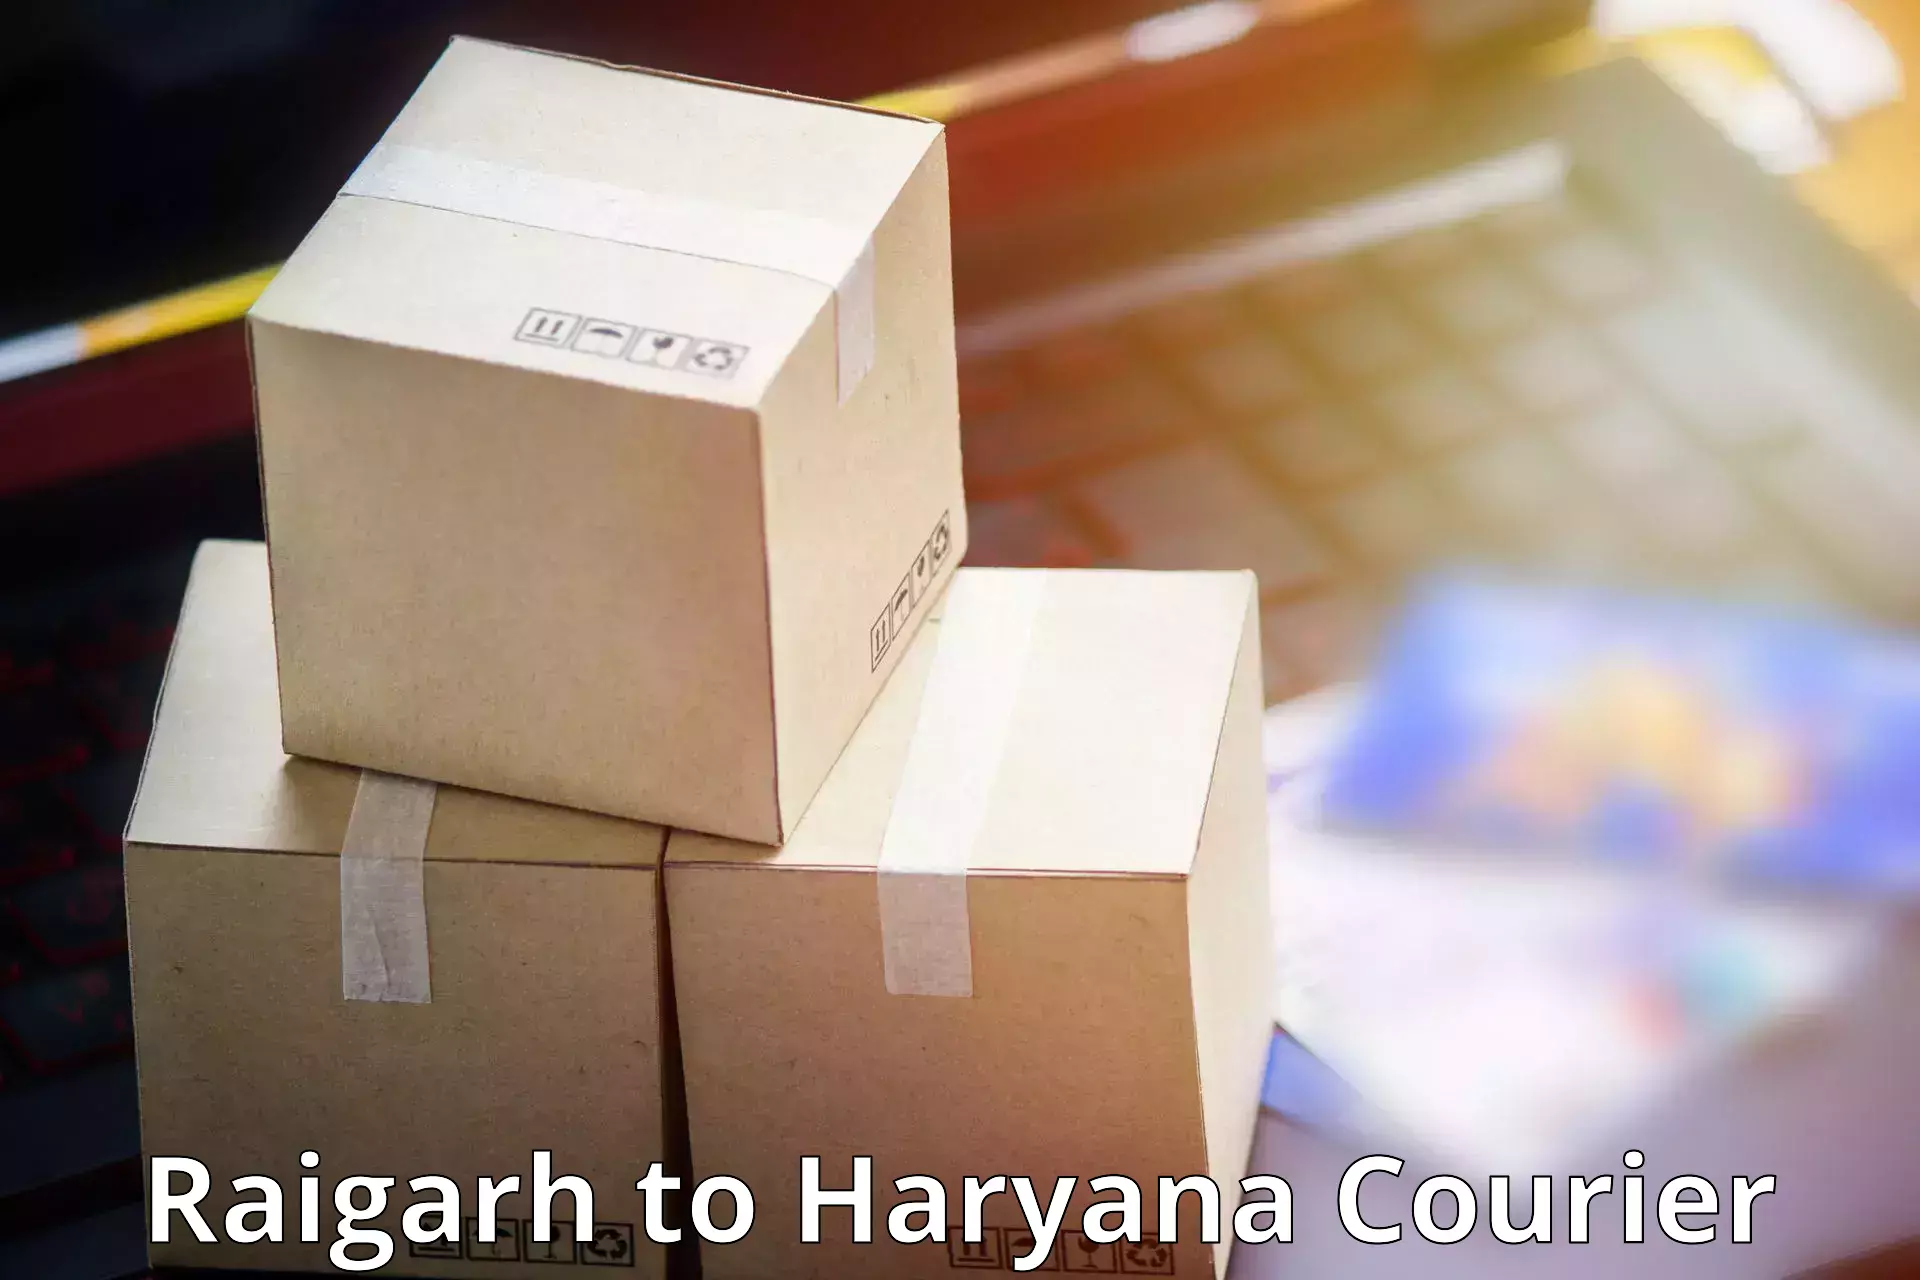 State-of-the-art courier technology Raigarh to Samalkha